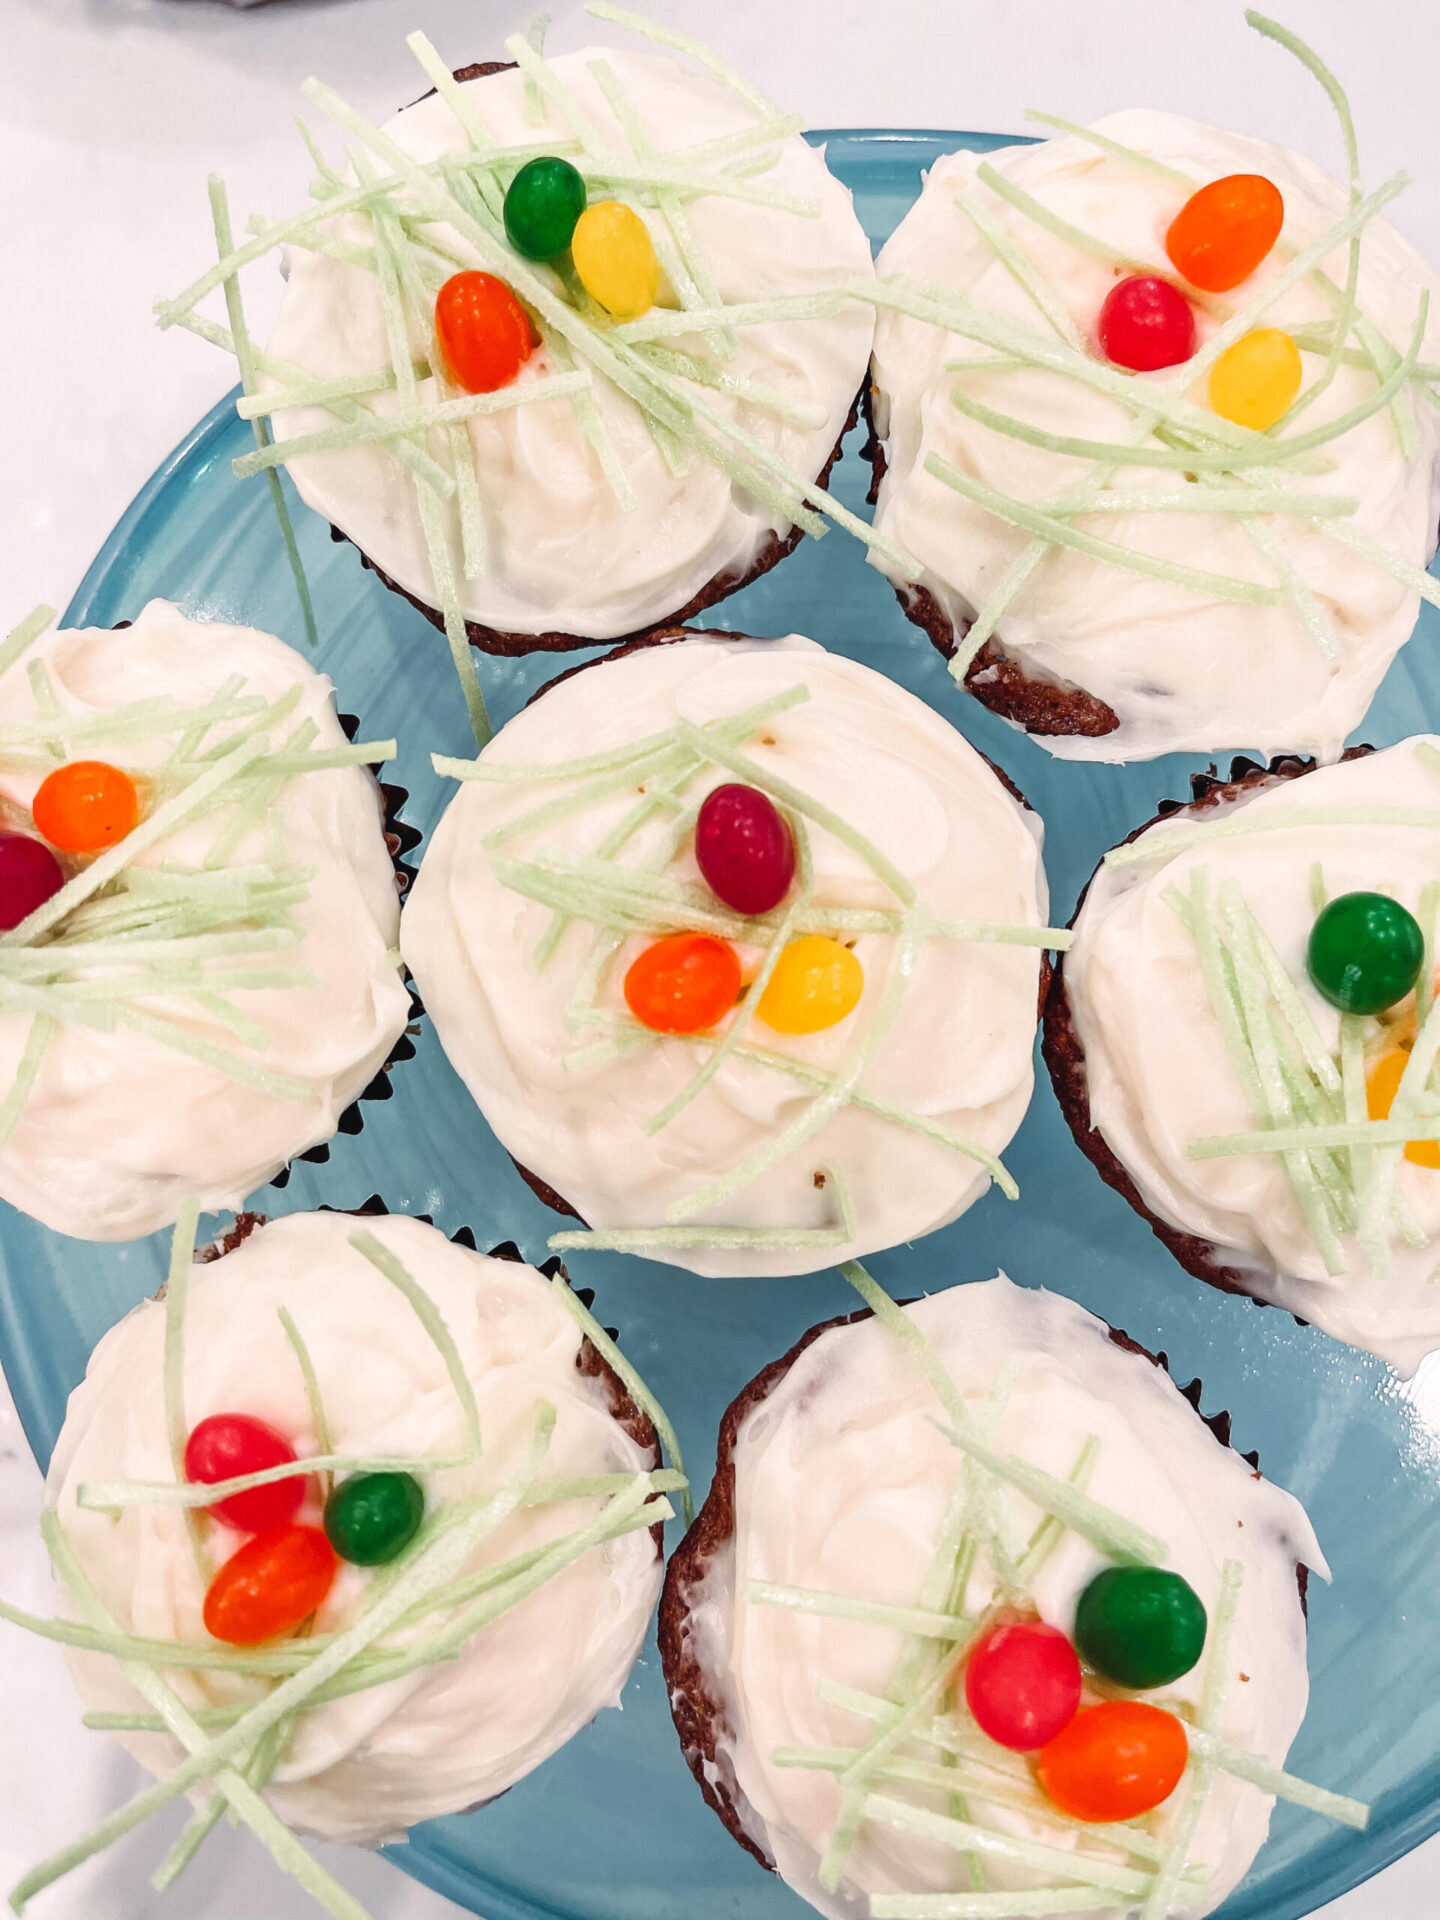 Carrot Cake Cupcakes by popular Nashville lifestyle blog, Hello Happiness: image of cupcakes with white frosting, jelly beans, and green coconut flakes. 